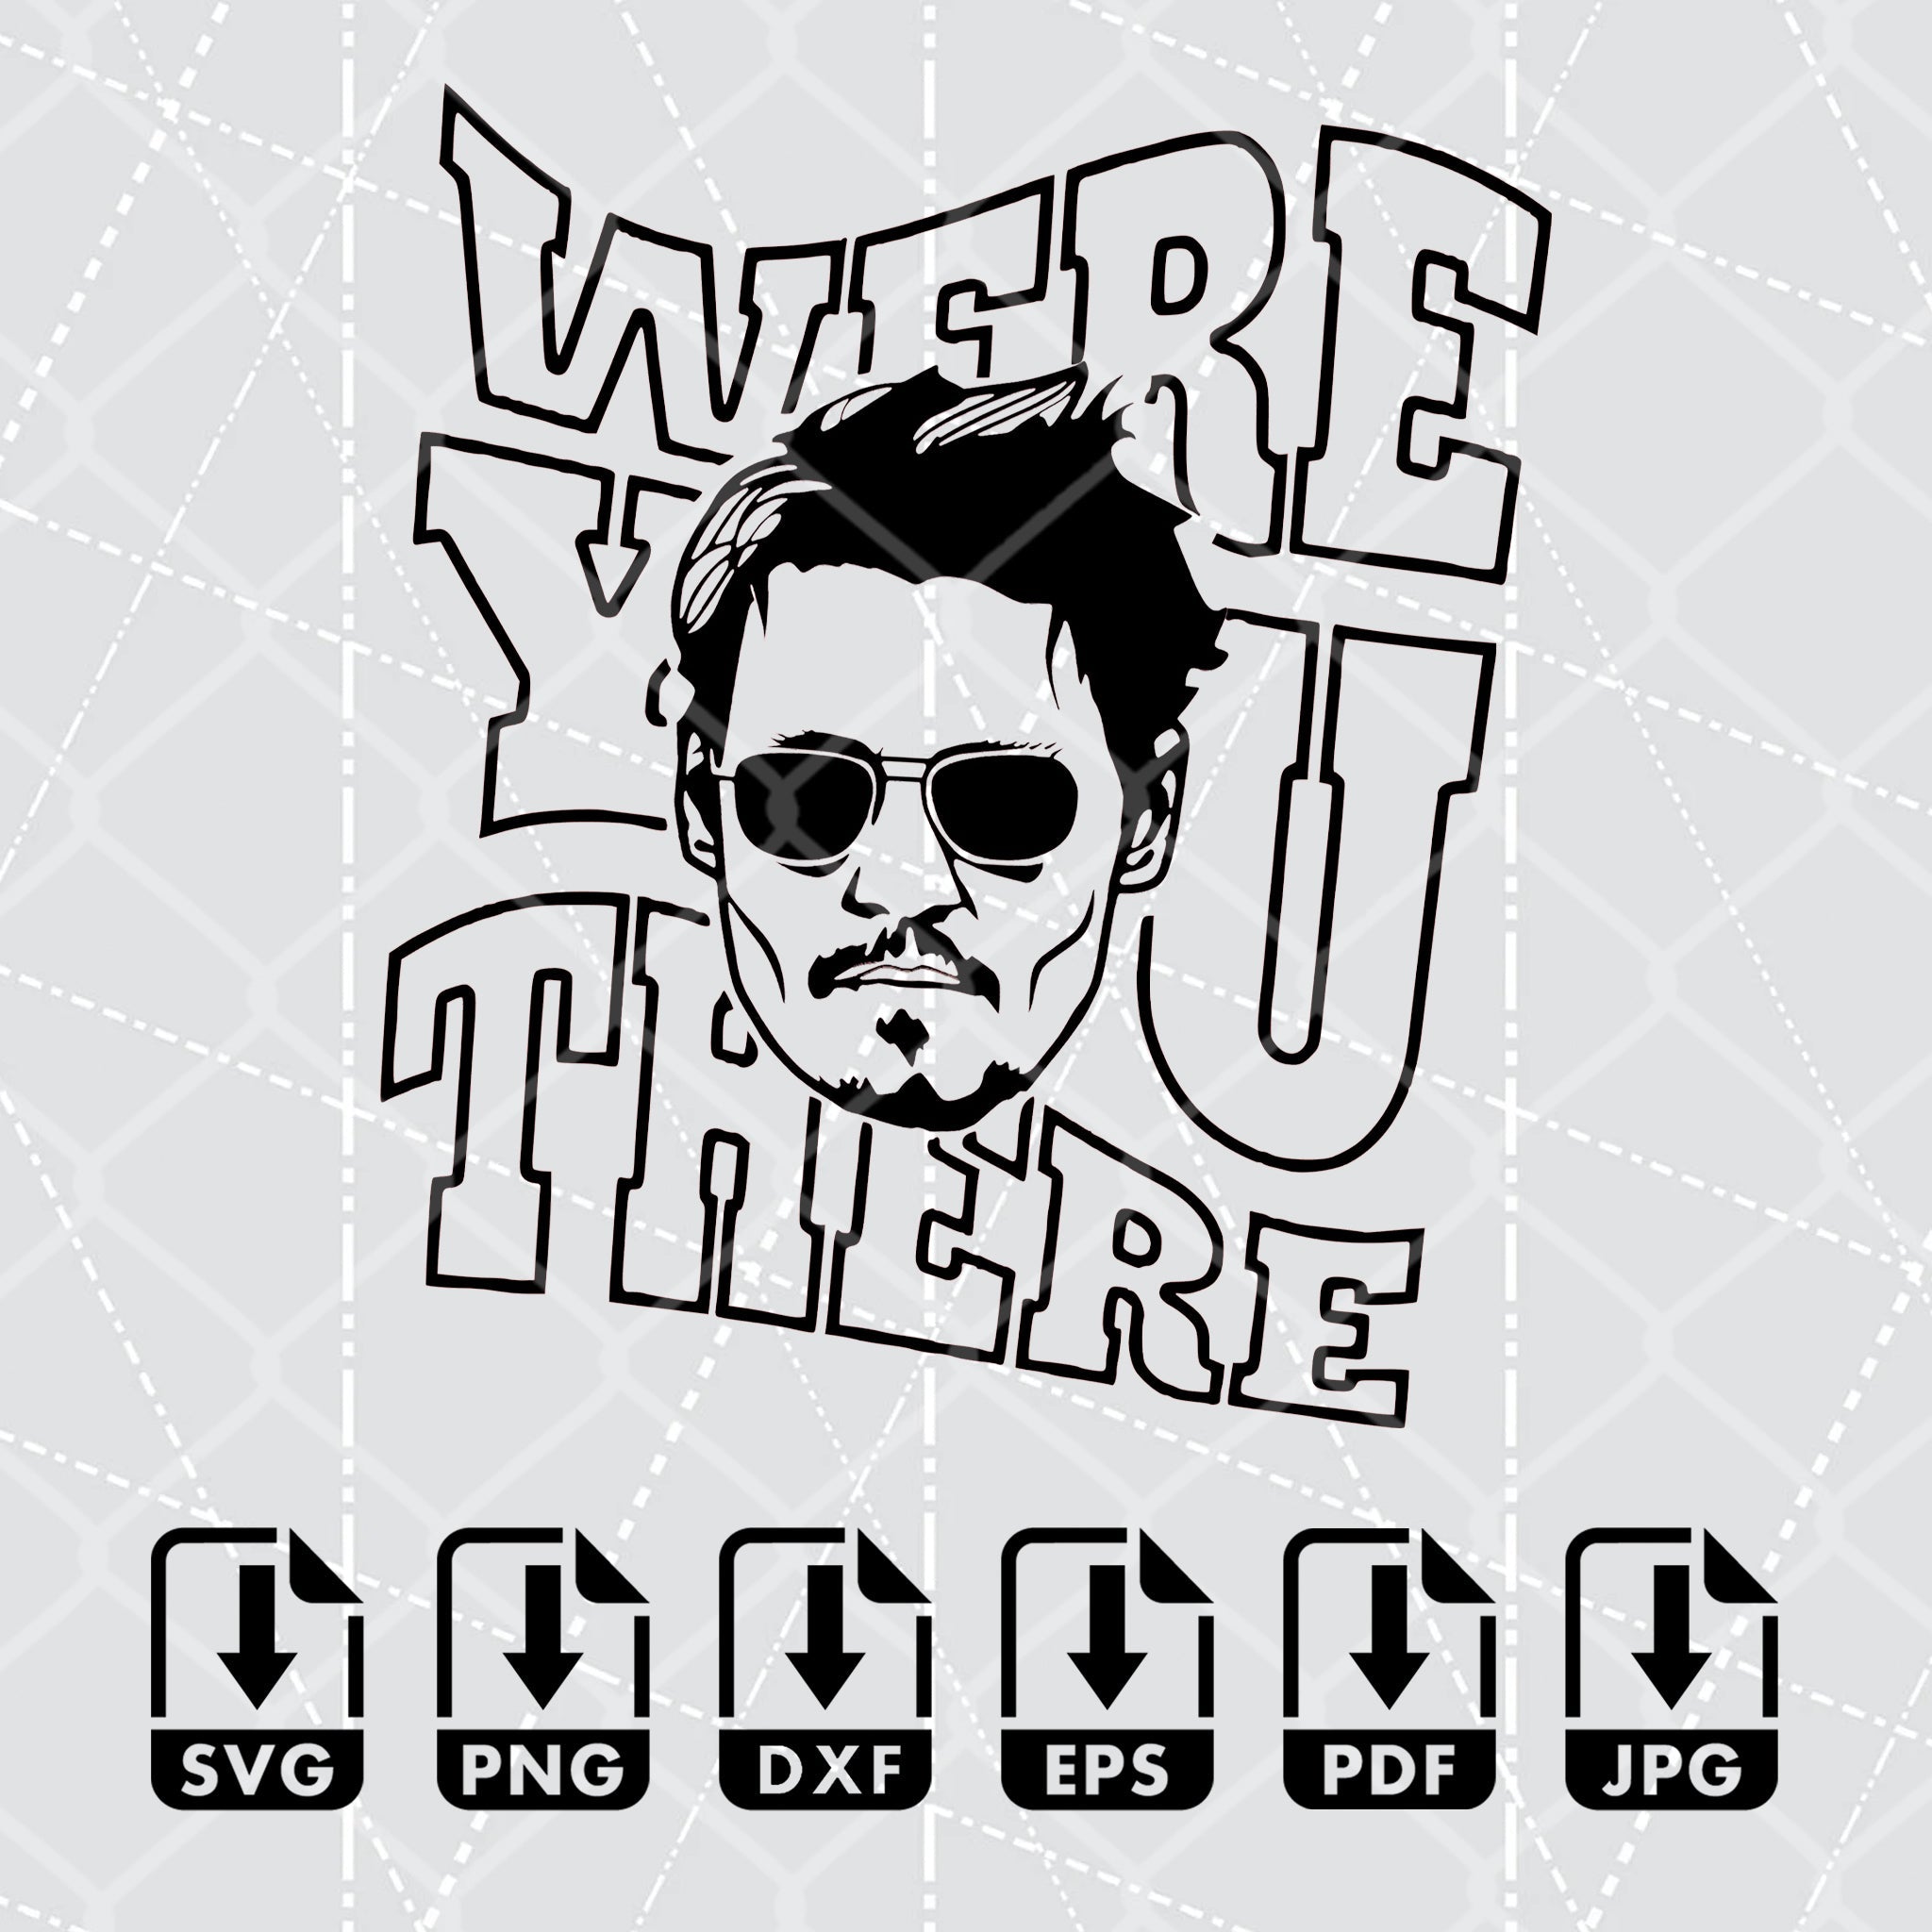 Johnny Depp - Were You There